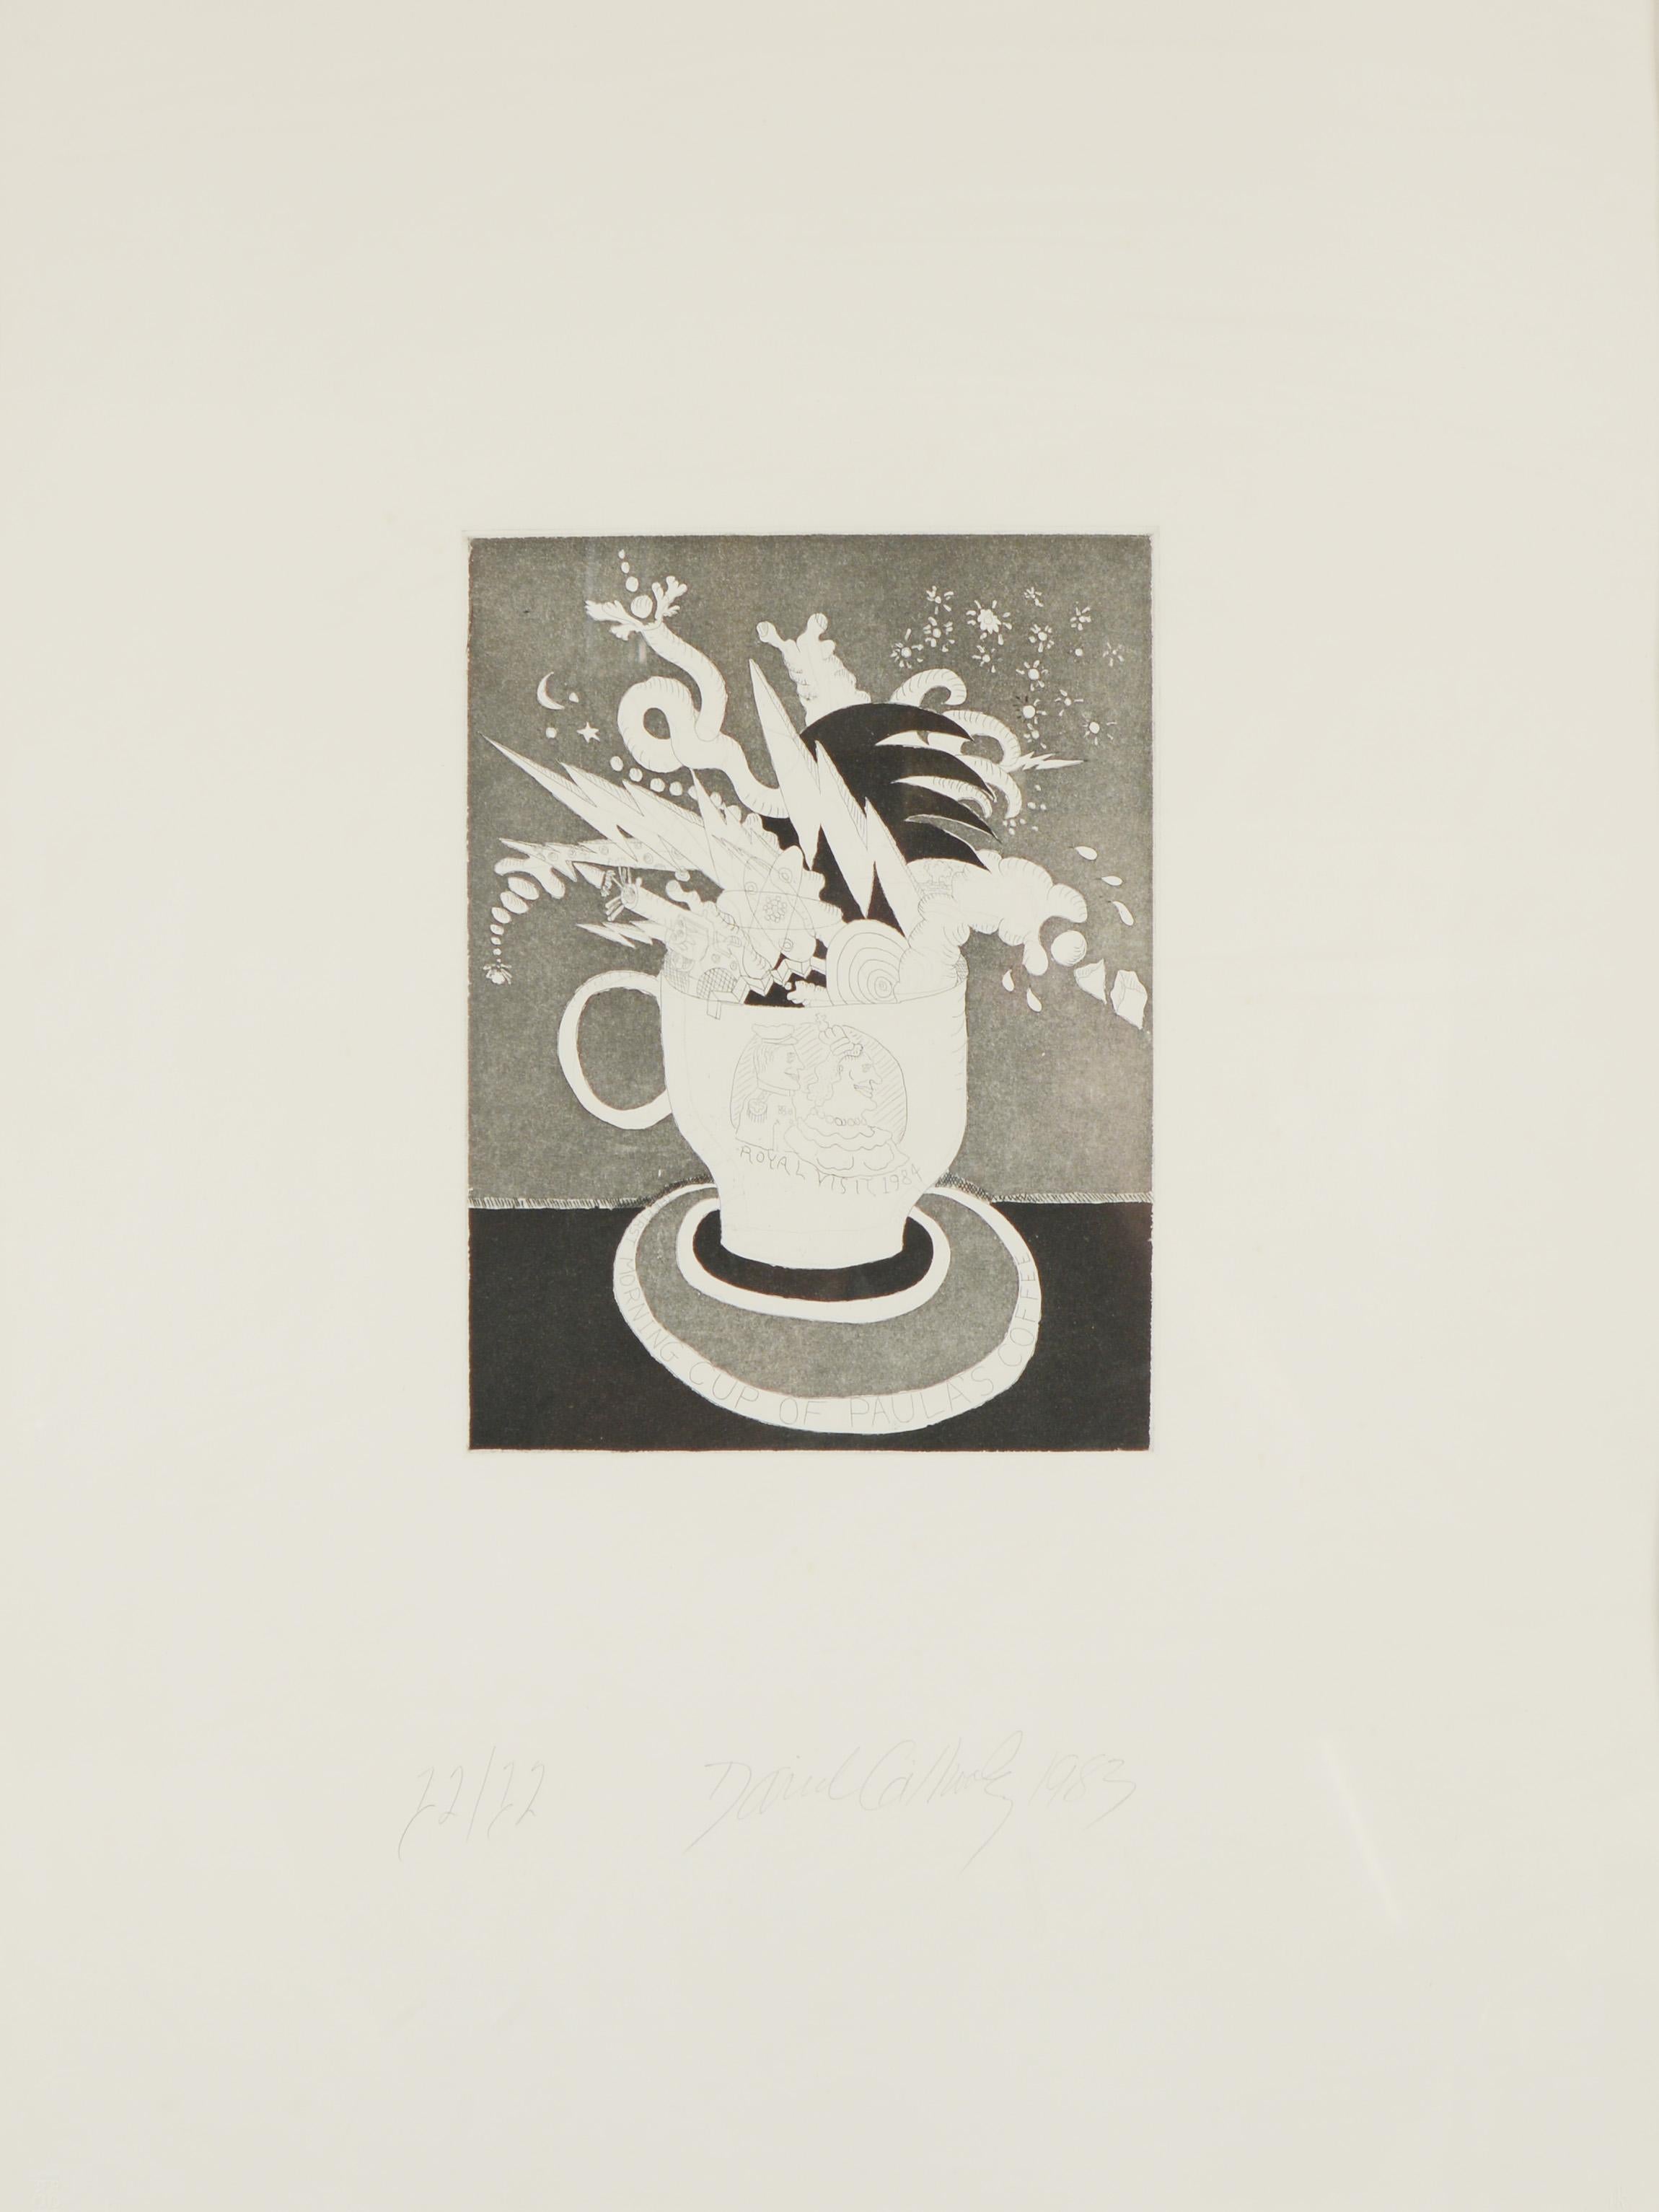 Print titled The First Morning Cup of Paula's Coffee by David Gilhooly (1943-2013). The print is dated 1983 and is numbered 12 / 12. This was published by 3EP Ltd. This was probably framed at the time the print was made. It has not been examined out